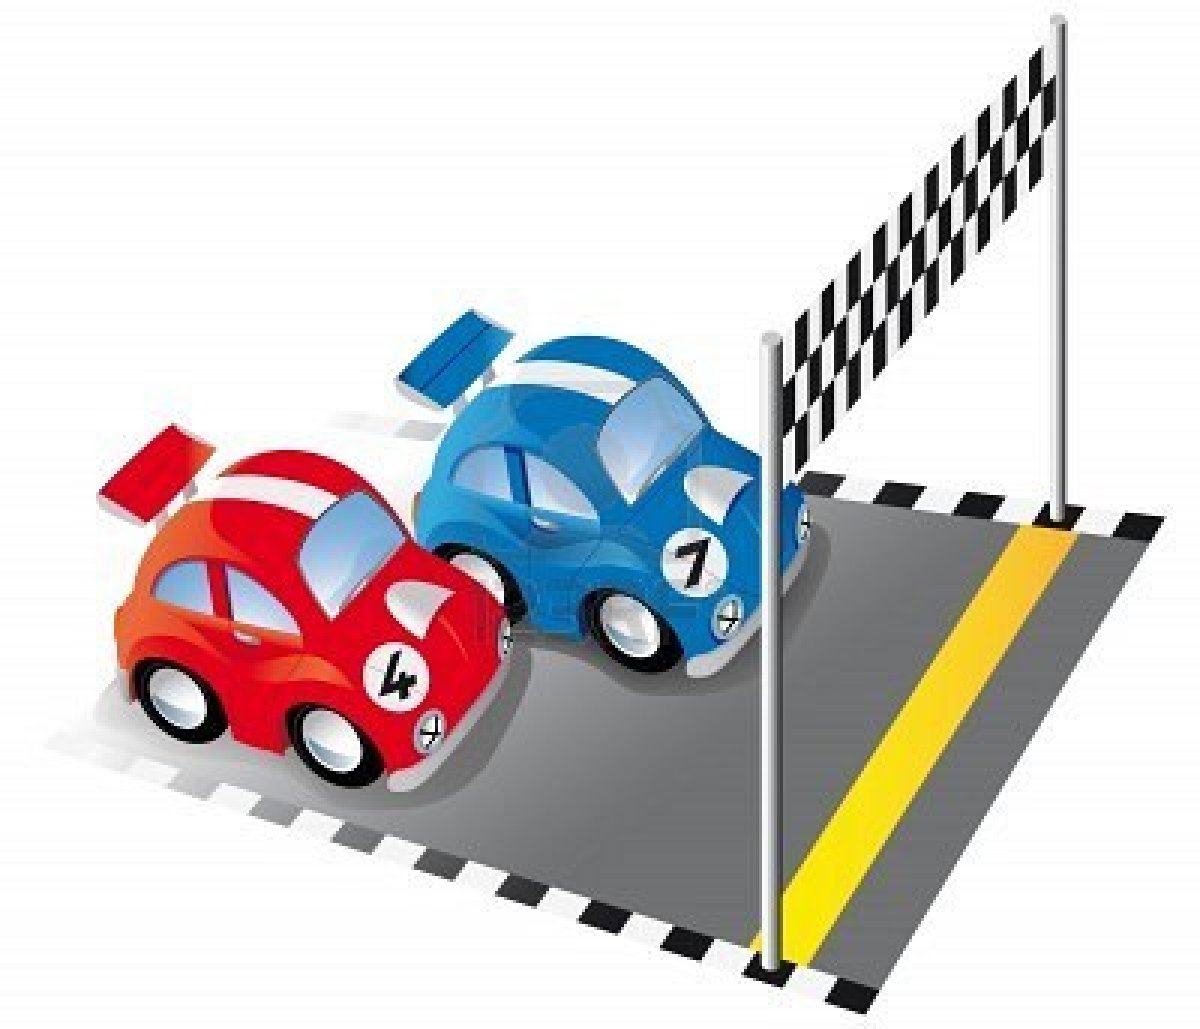 7166387 Two Funny Race Cars On Race Track With Finish Line And